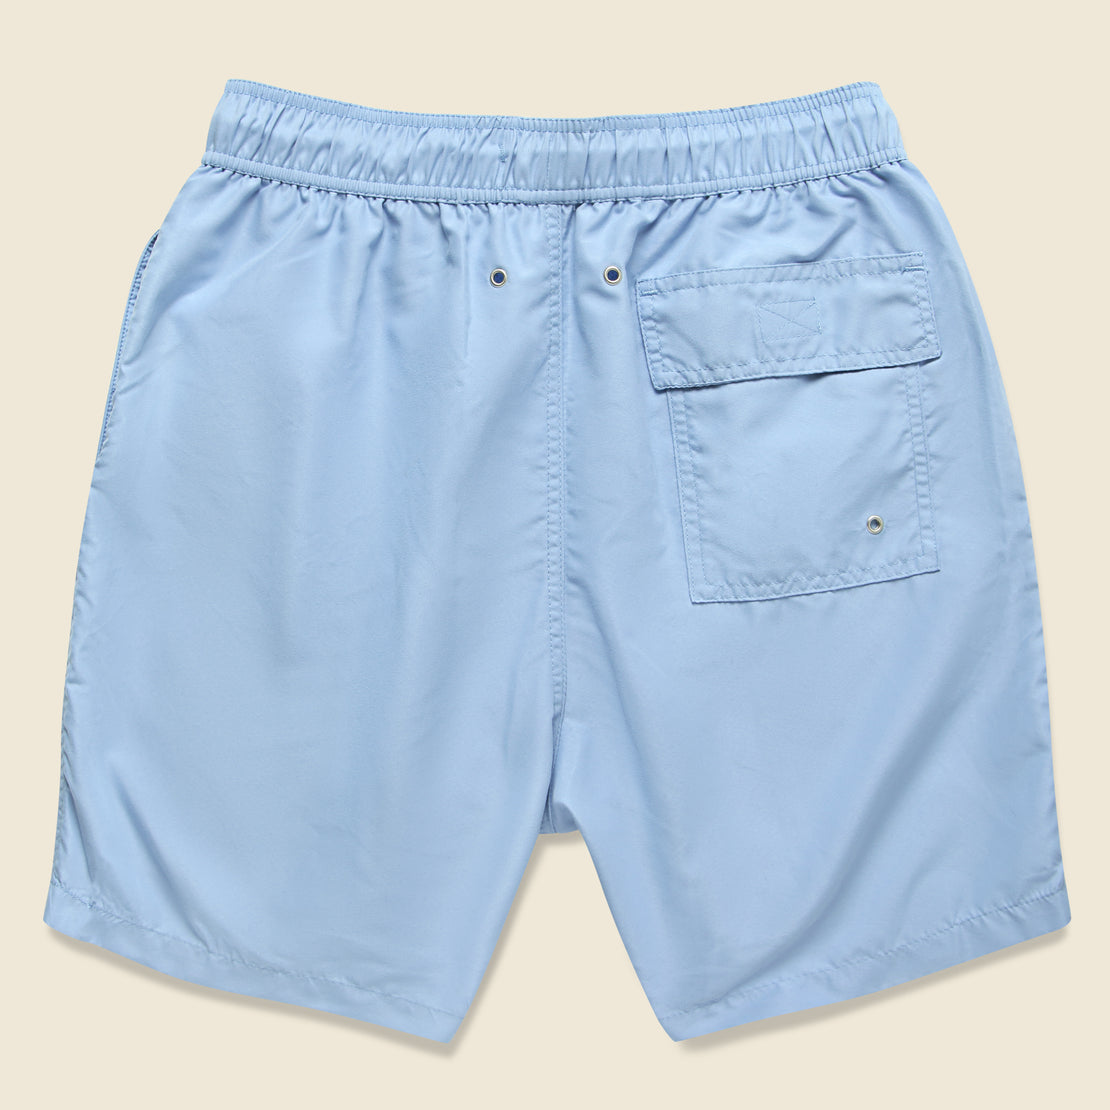 Seal Swim Trunk - Sky Blue - Penfield - STAG Provisions - Shorts - Swim